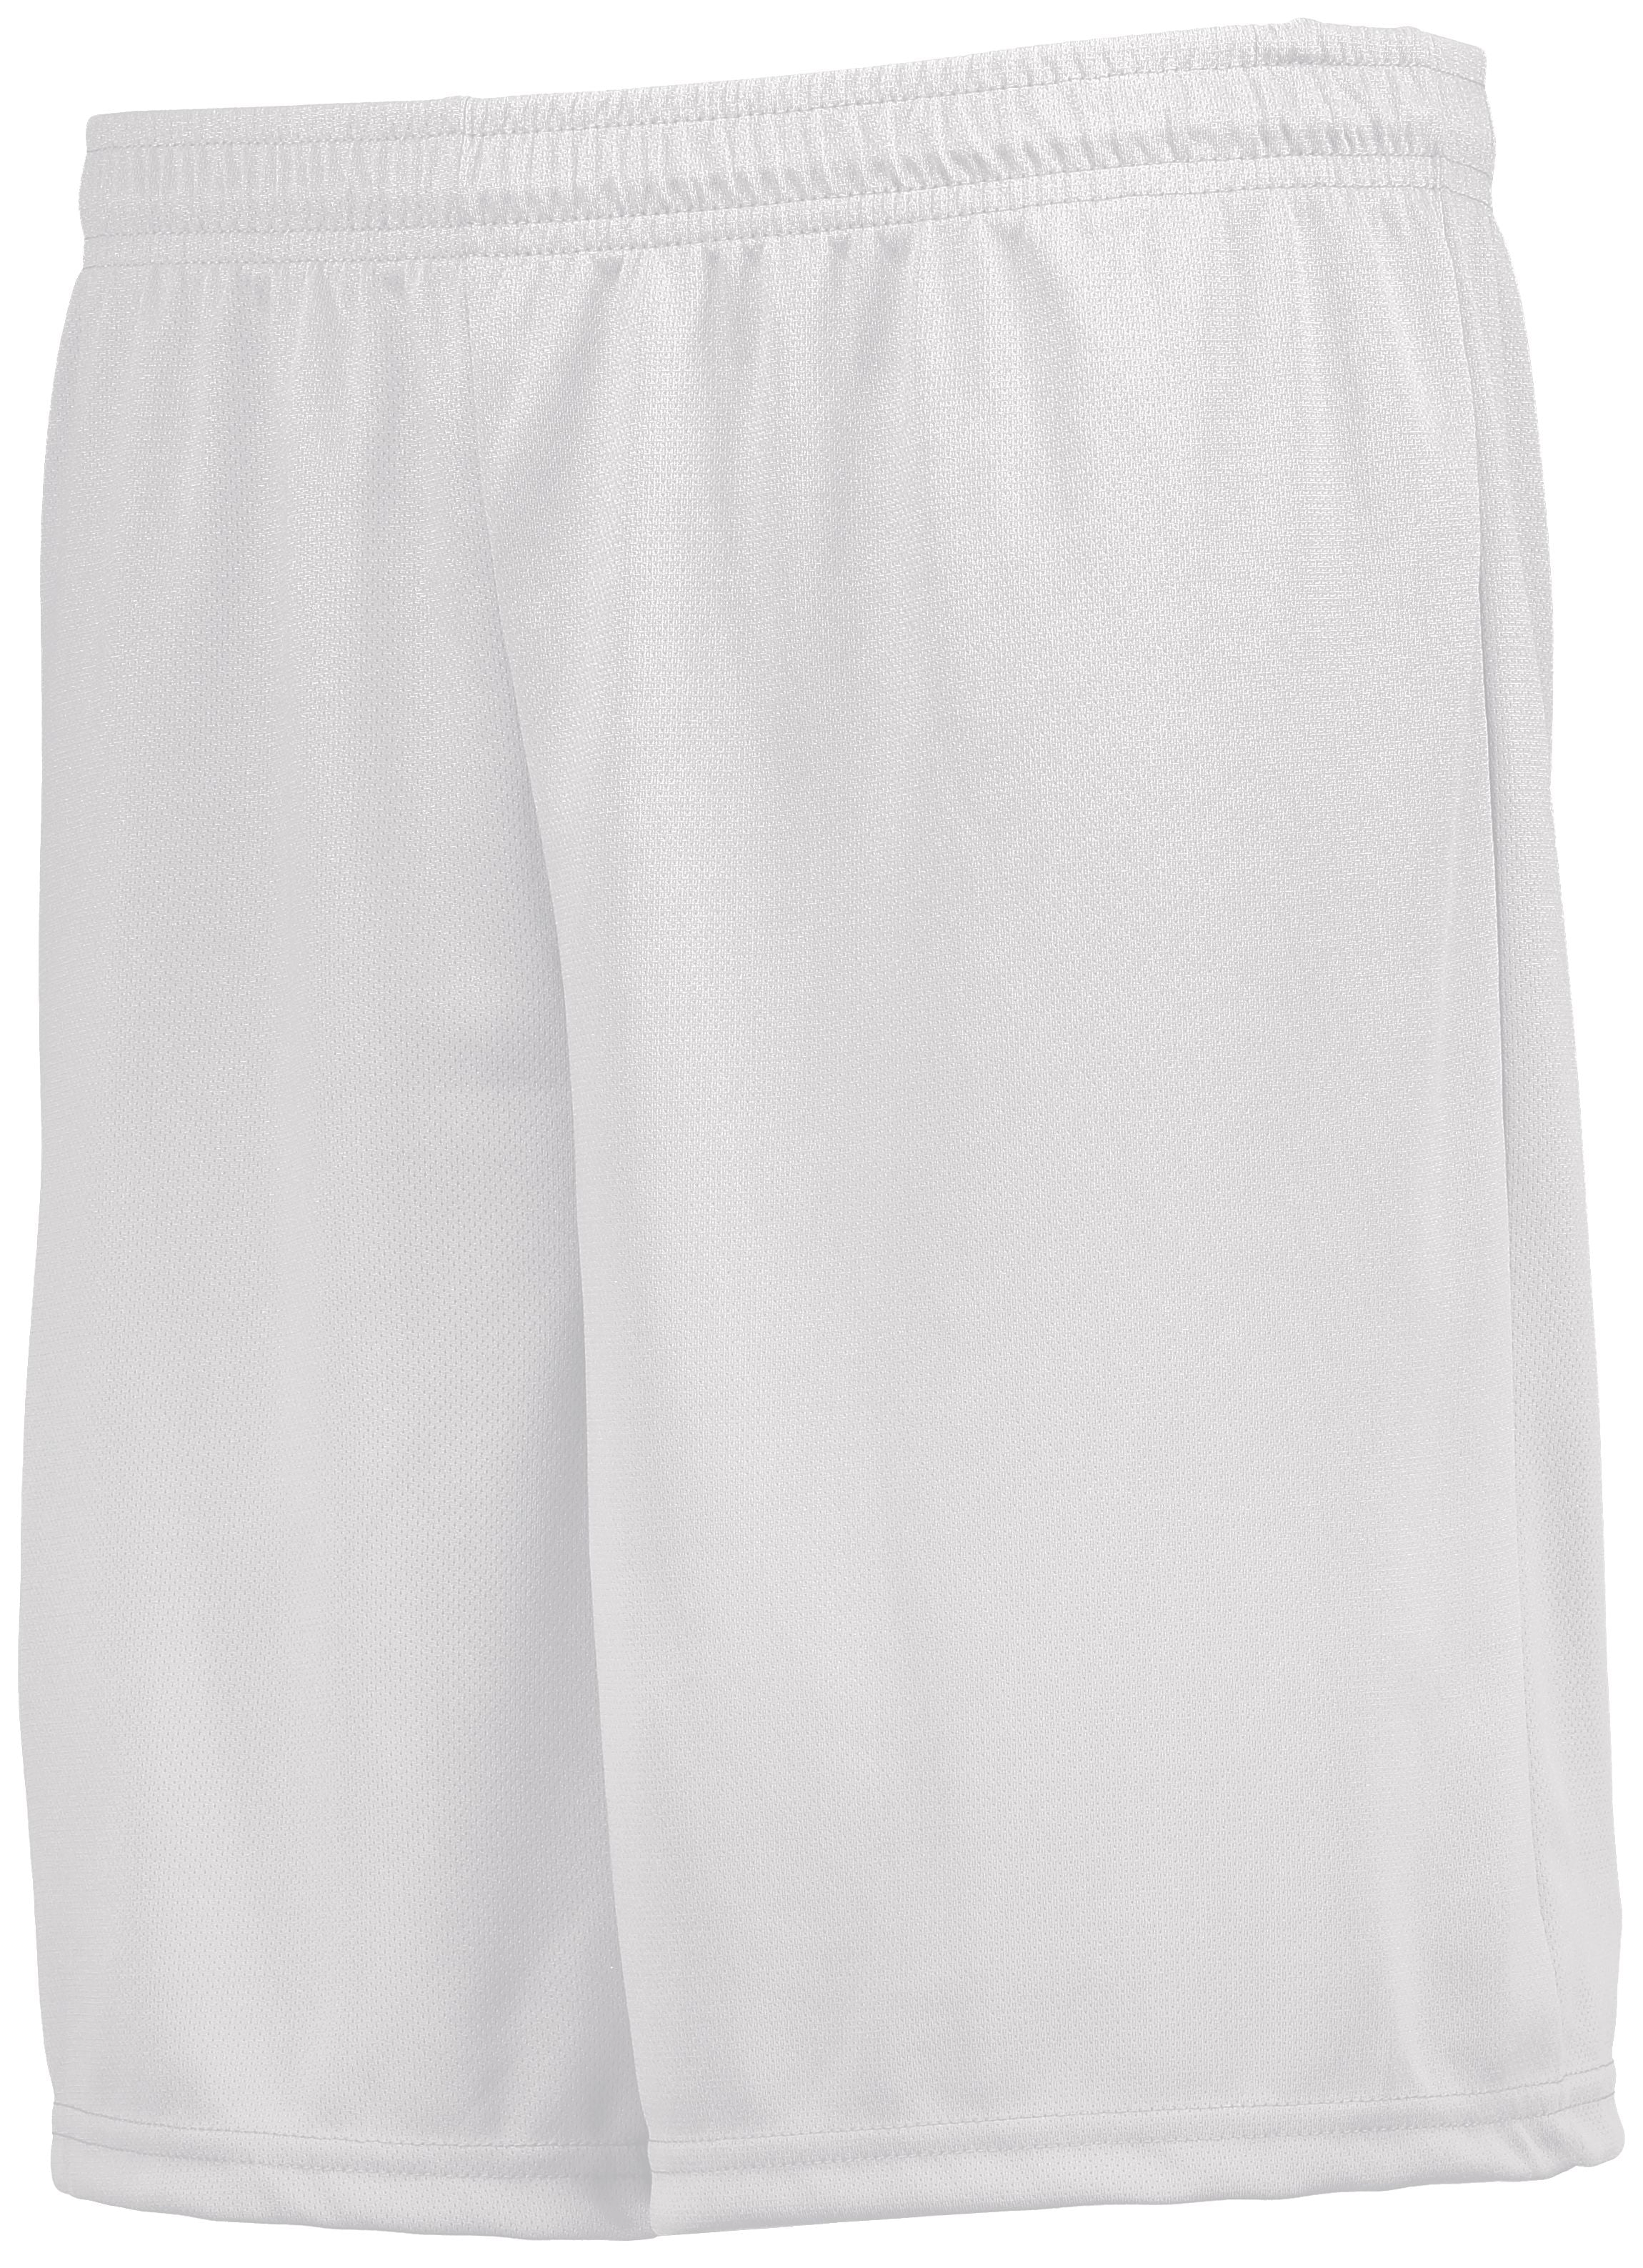 Youth Prevail Shorts 325431